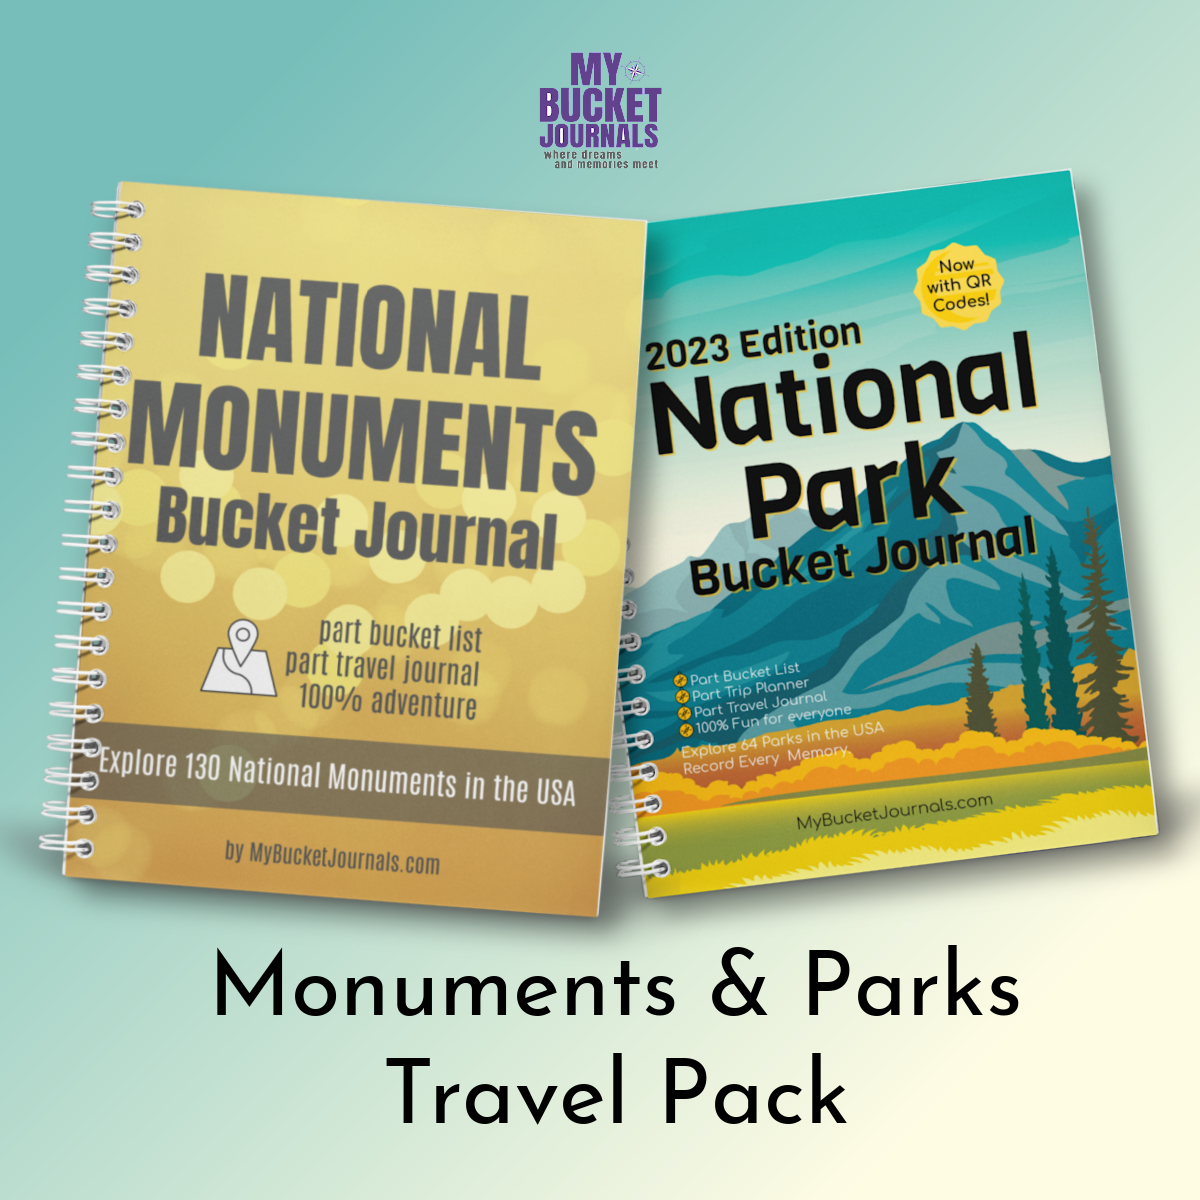 Monuments & Parks Travel Pack